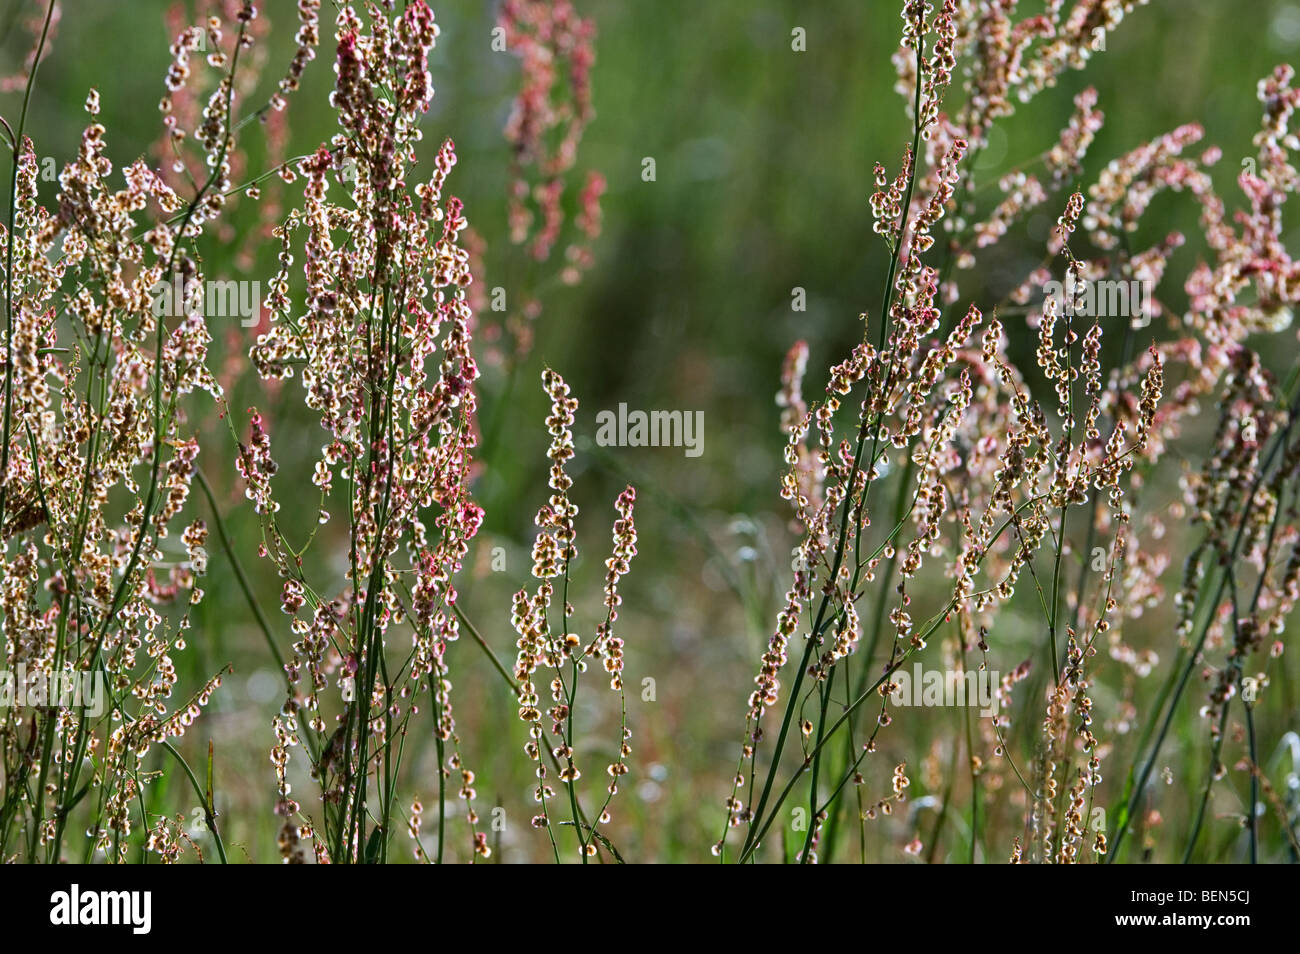 Common sorrel / sour dock / spinach dock / narrow-leaved dock (Rumex acetosa) in flower Stock Photo